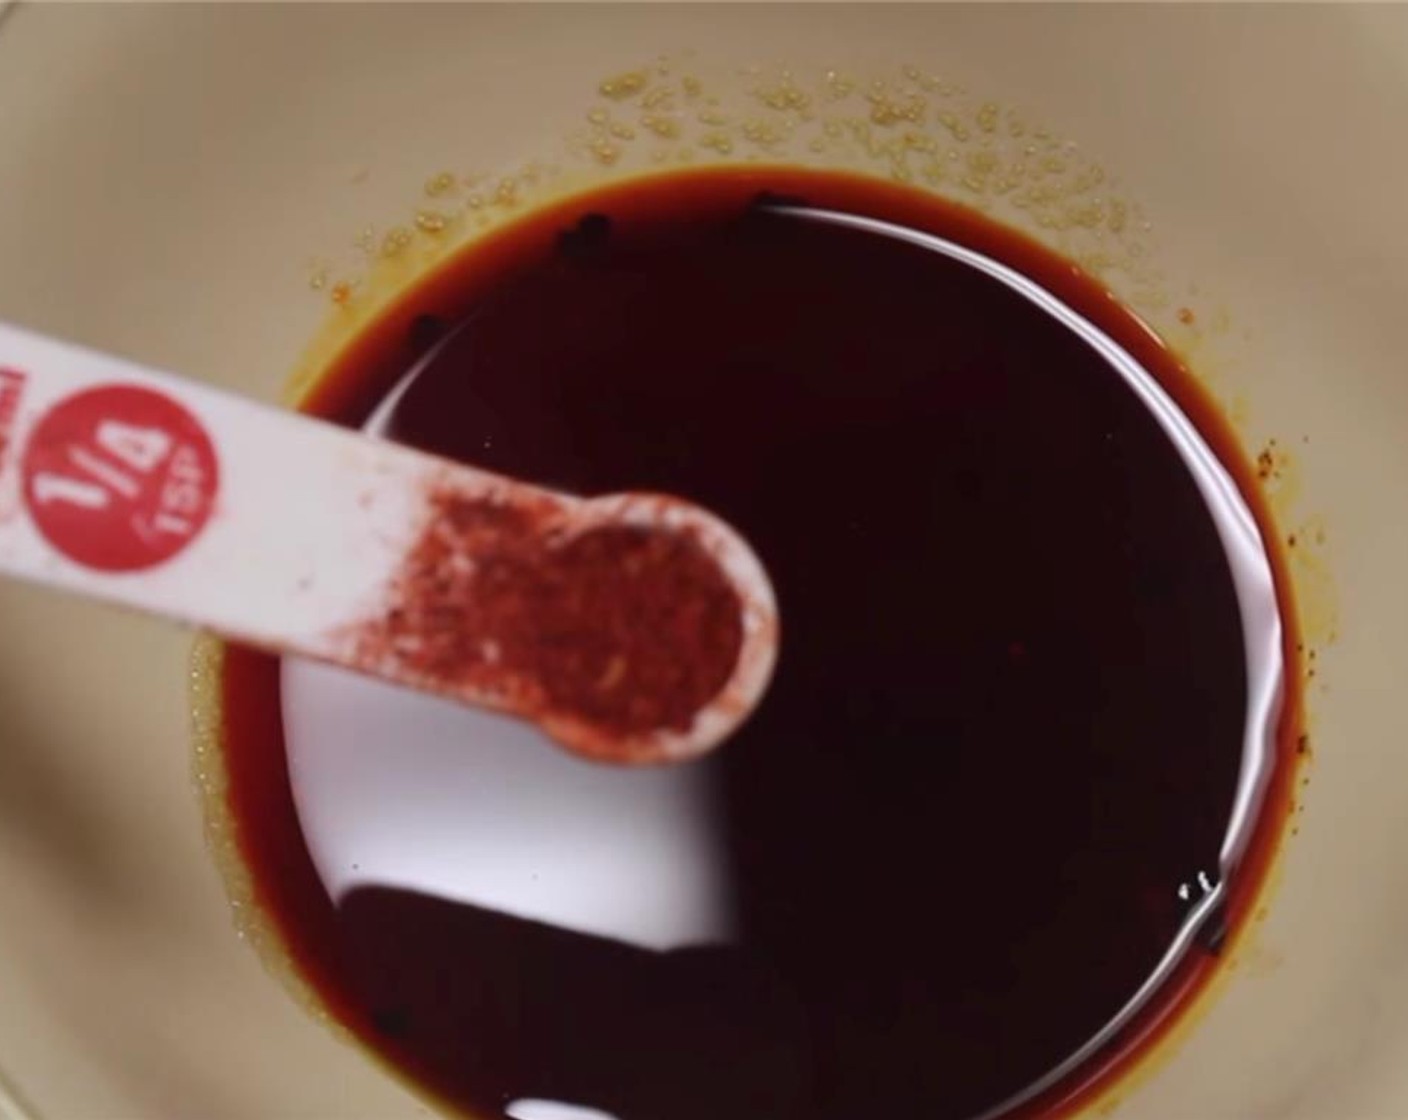 step 1 To make sauce, combine Granulated Sugar (1 Tbsp) plus additional Granulated Sugar (1 tsp), with Shaoxing Cooking Wine (1 Tbsp), Soy Sauce (1 Tbsp), Salt (1/4 tsp), Chili Oil (1/2 Tbsp), Red Chili Powder (1 tsp) and Unsalted Chicken Stock (1/4 cup) and stir.